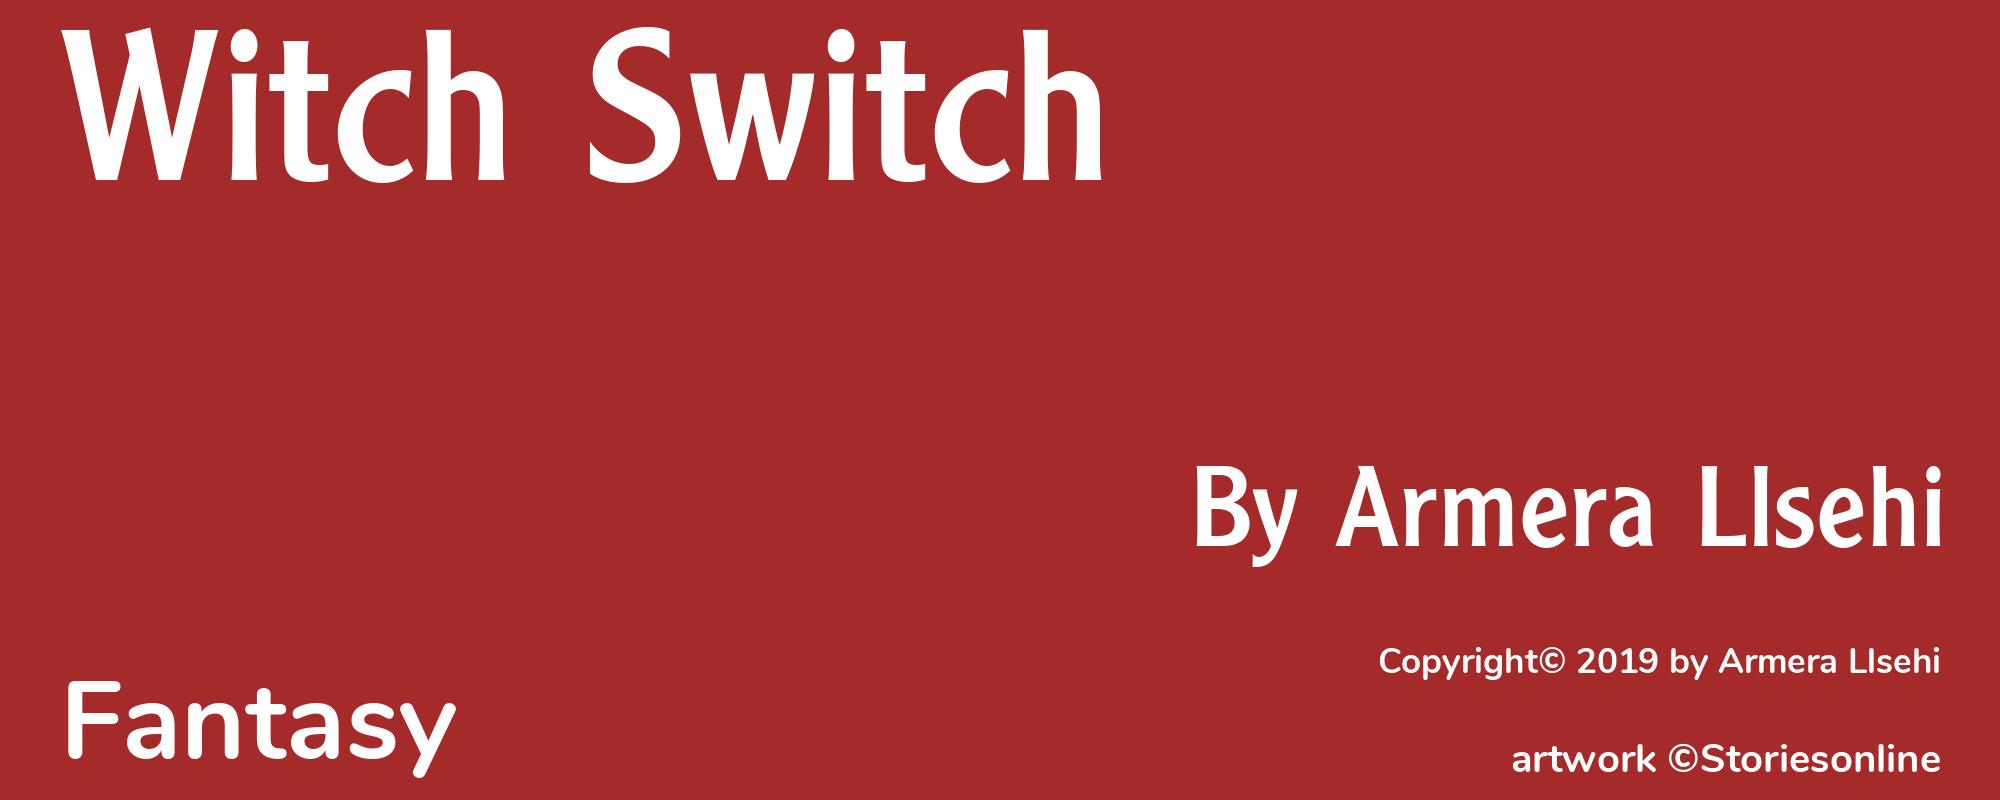 Witch Switch - Cover